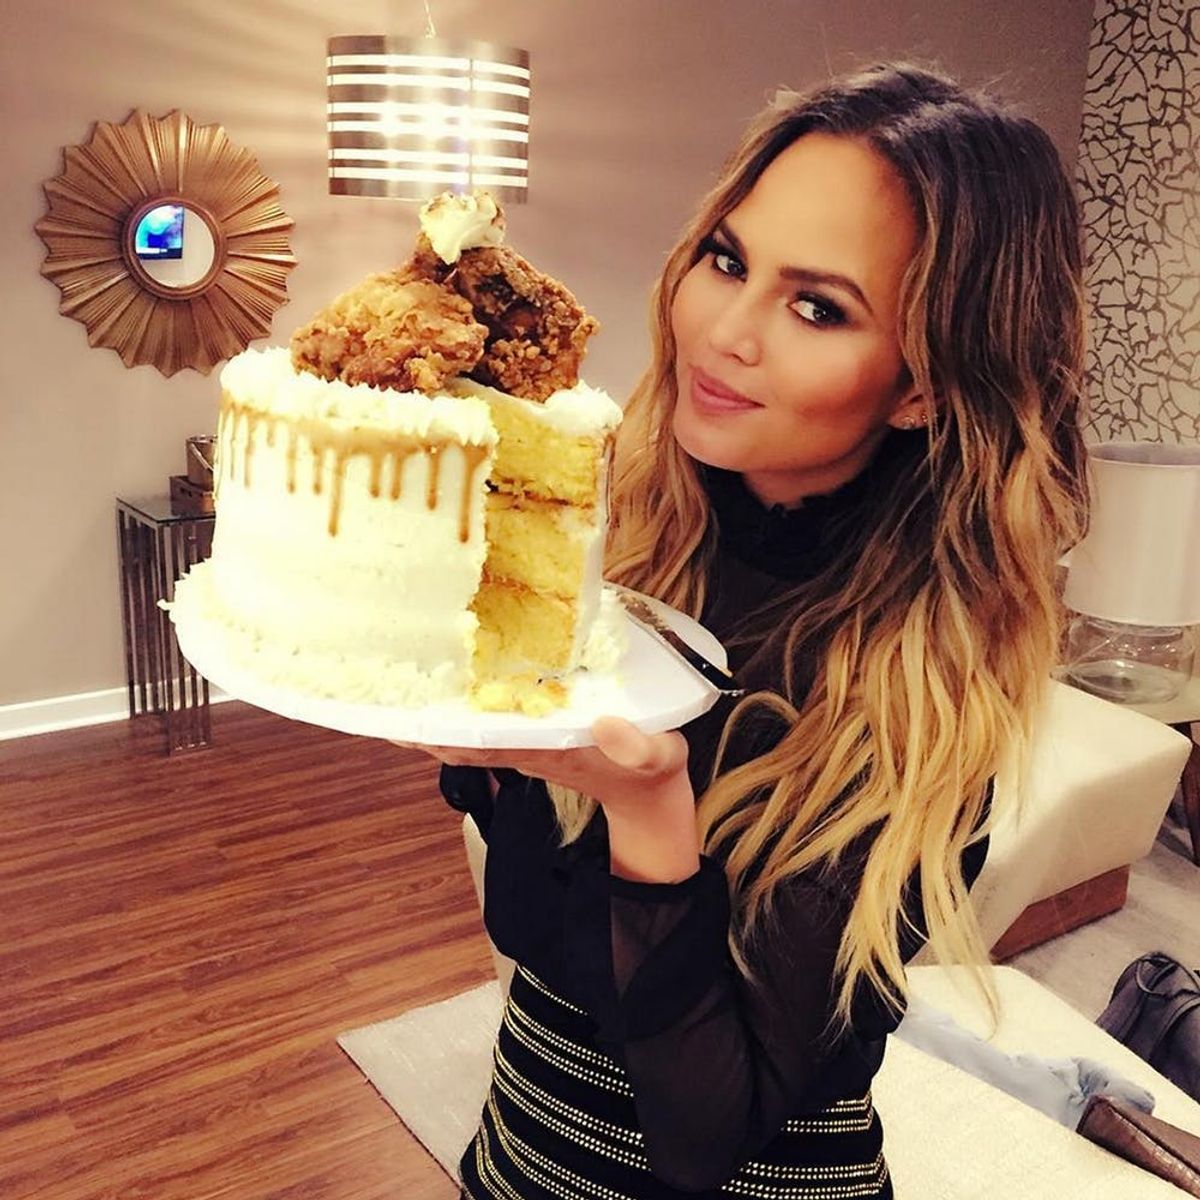 These Are the Pregnancy Foods Chrissy Teigen Is Craving RN